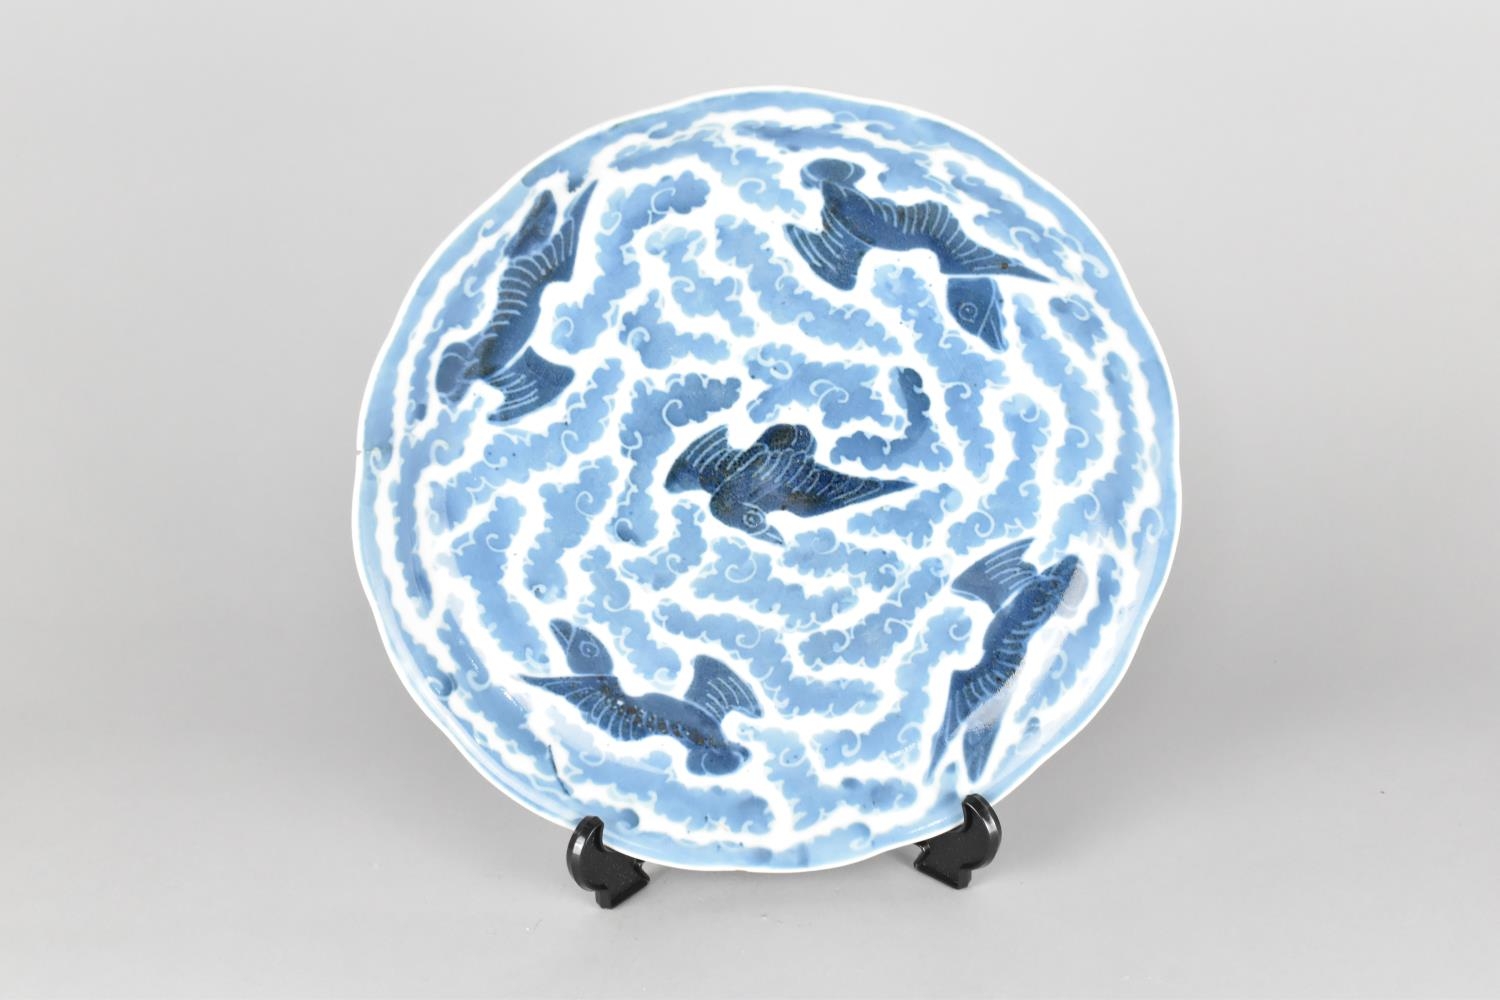 A Oriental Porcelain Blue and White Plate with Wavy Rim Decorated with Birds in Flight Amongst